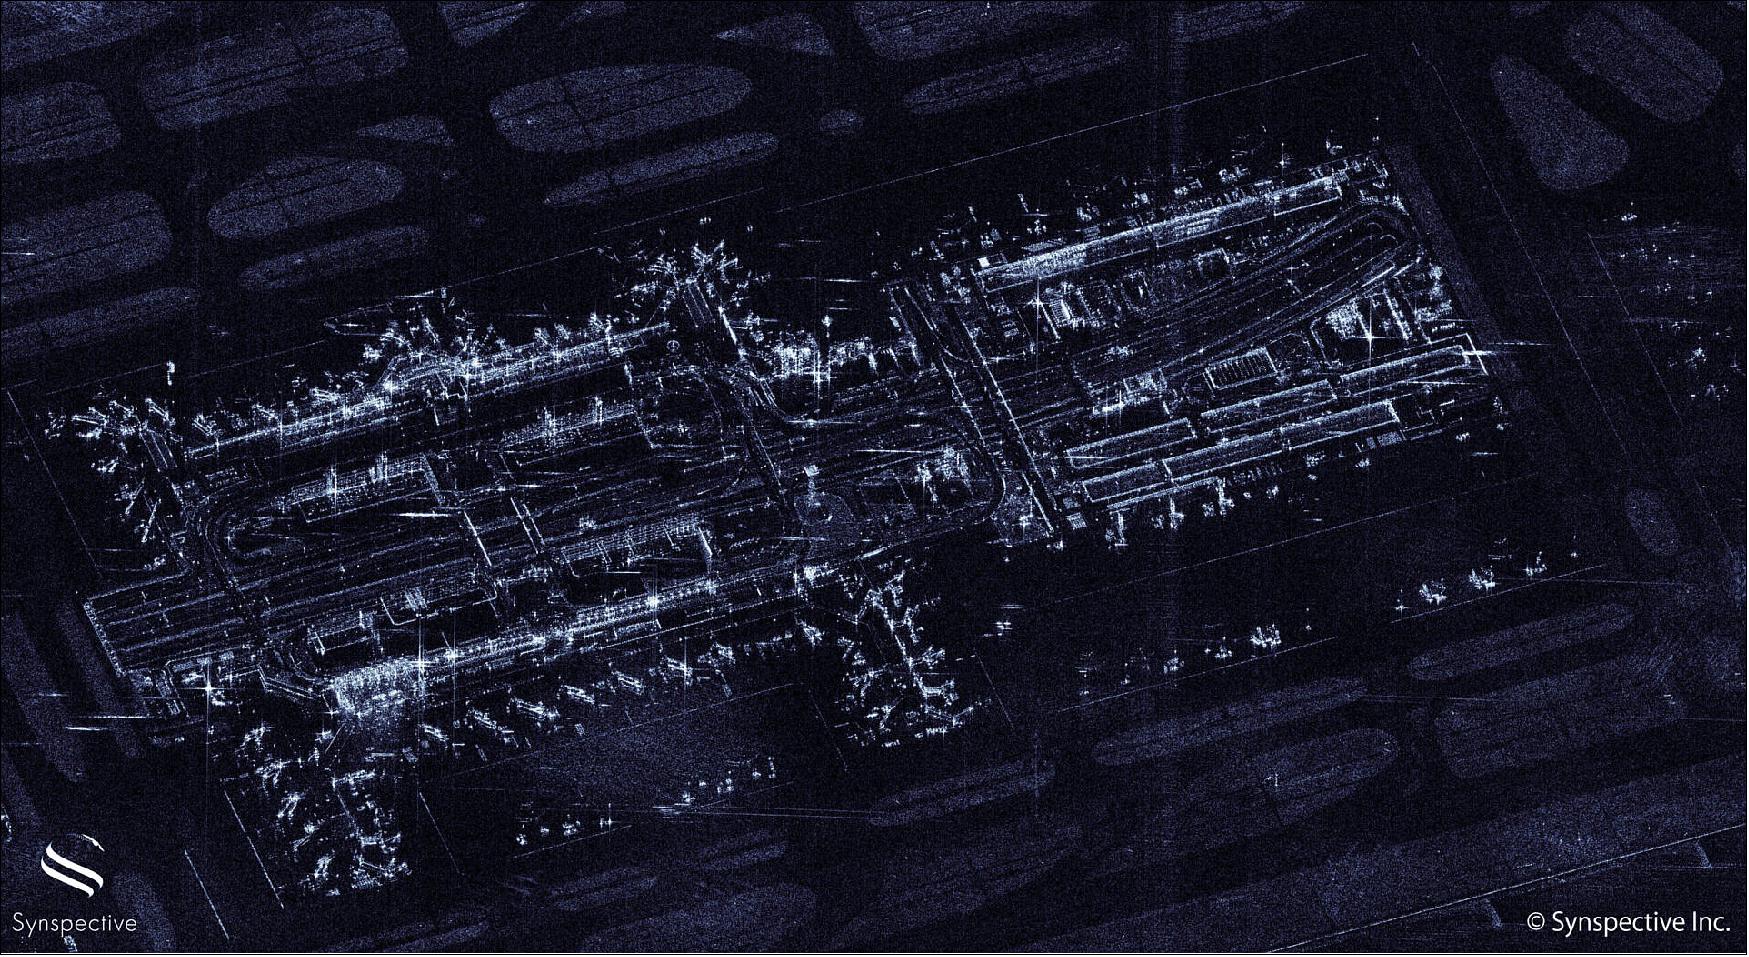 Figure 11: The airport has three terminals, of which two terminals are seen in this image. You can also see the control tower, at the center of the image. The planes are lined up and parked at aprons, ready for departure. Taxiways to lead the planes to runways are also clearly observed (image credit: Synspective)